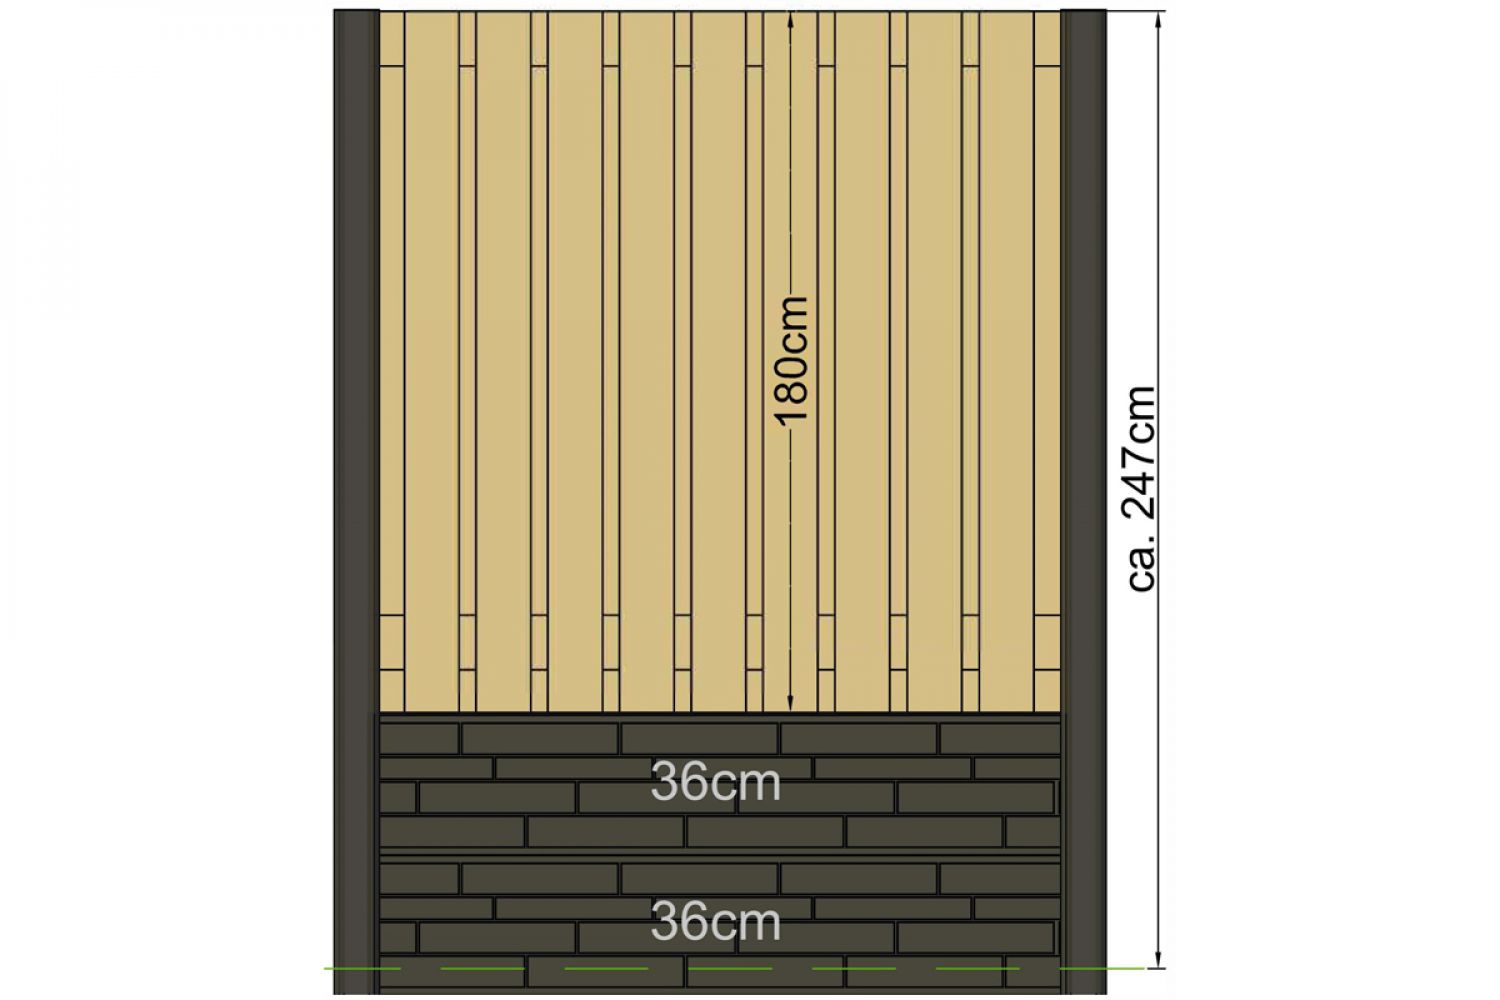 TOPDEAL! Betonnen sleufpaal EXTRA LANG antraciet 11,5x11,5x316 cm